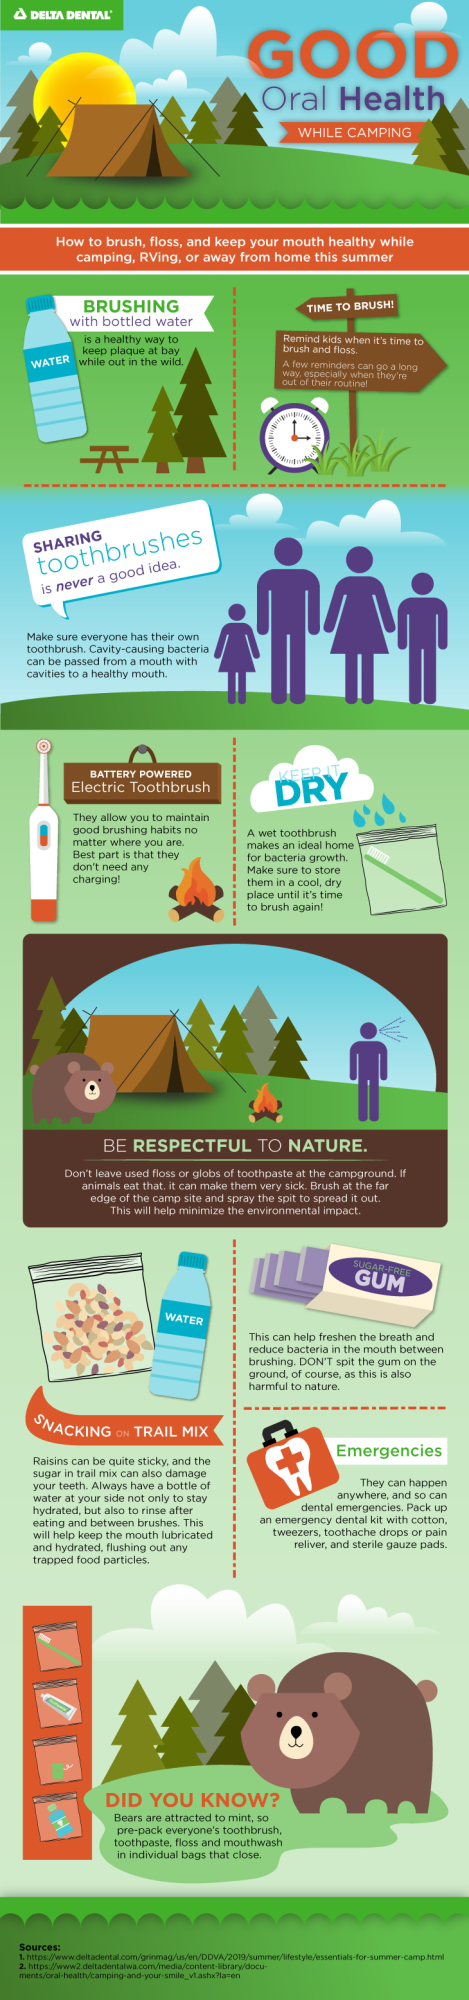 Maintain a healthy mouth while camping with our outdoor oral health tips.